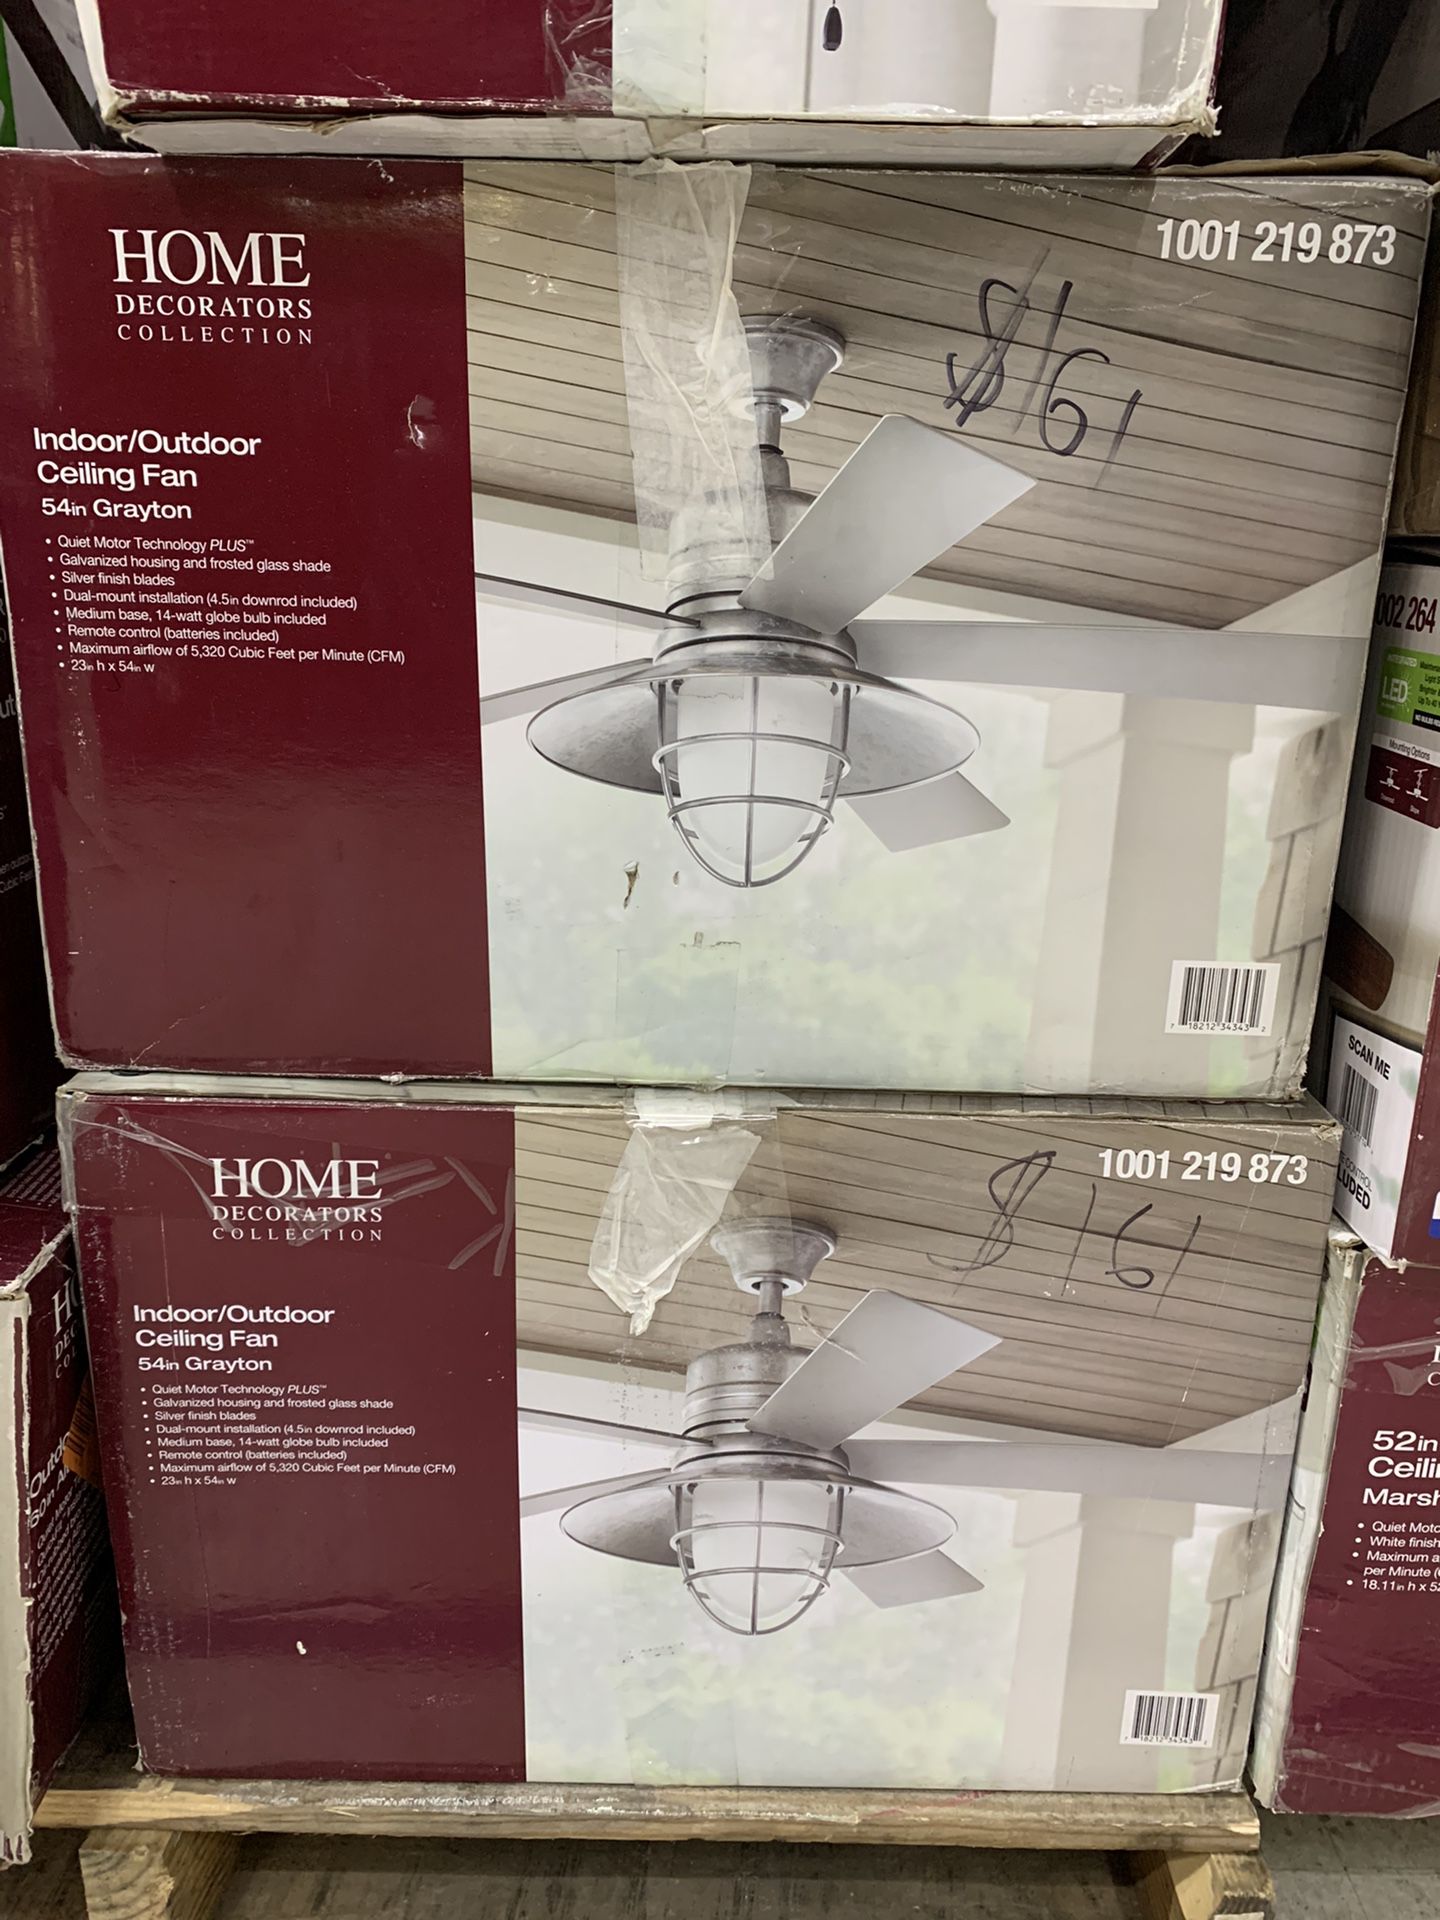 Home Decorators Collection Grayton 54 in. LED Indoor/Outdoor Galvanized Ceiling Fan with Light Kit and Remote Control